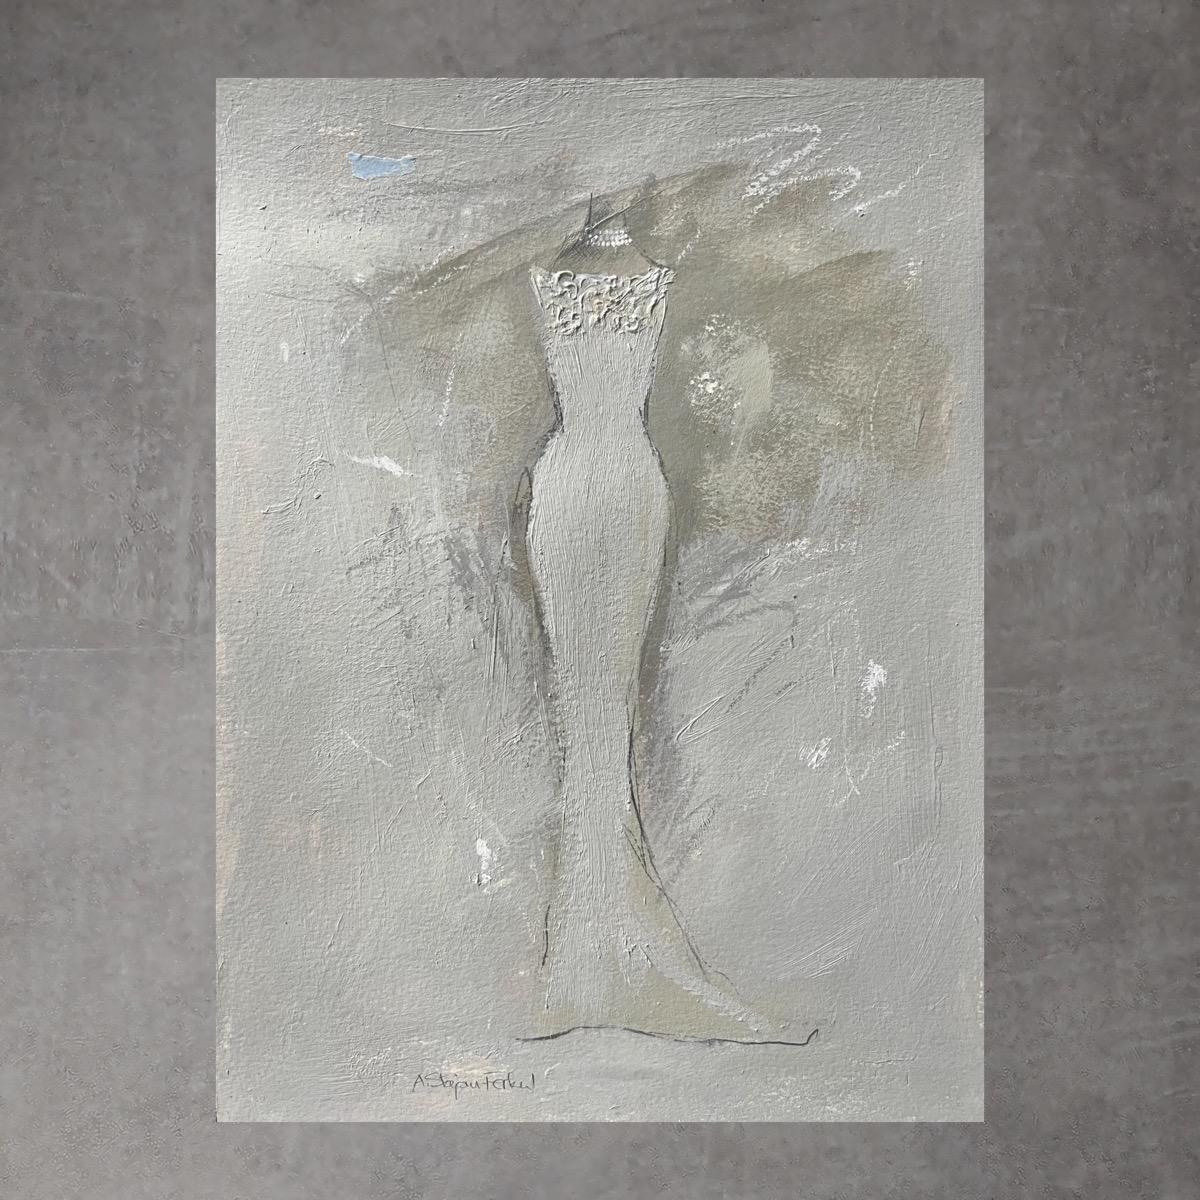 In The Moment - 9”x12”, Artwork On Paper, Neutrals, Greys - Painting by Andrea Stajan-Ferkul